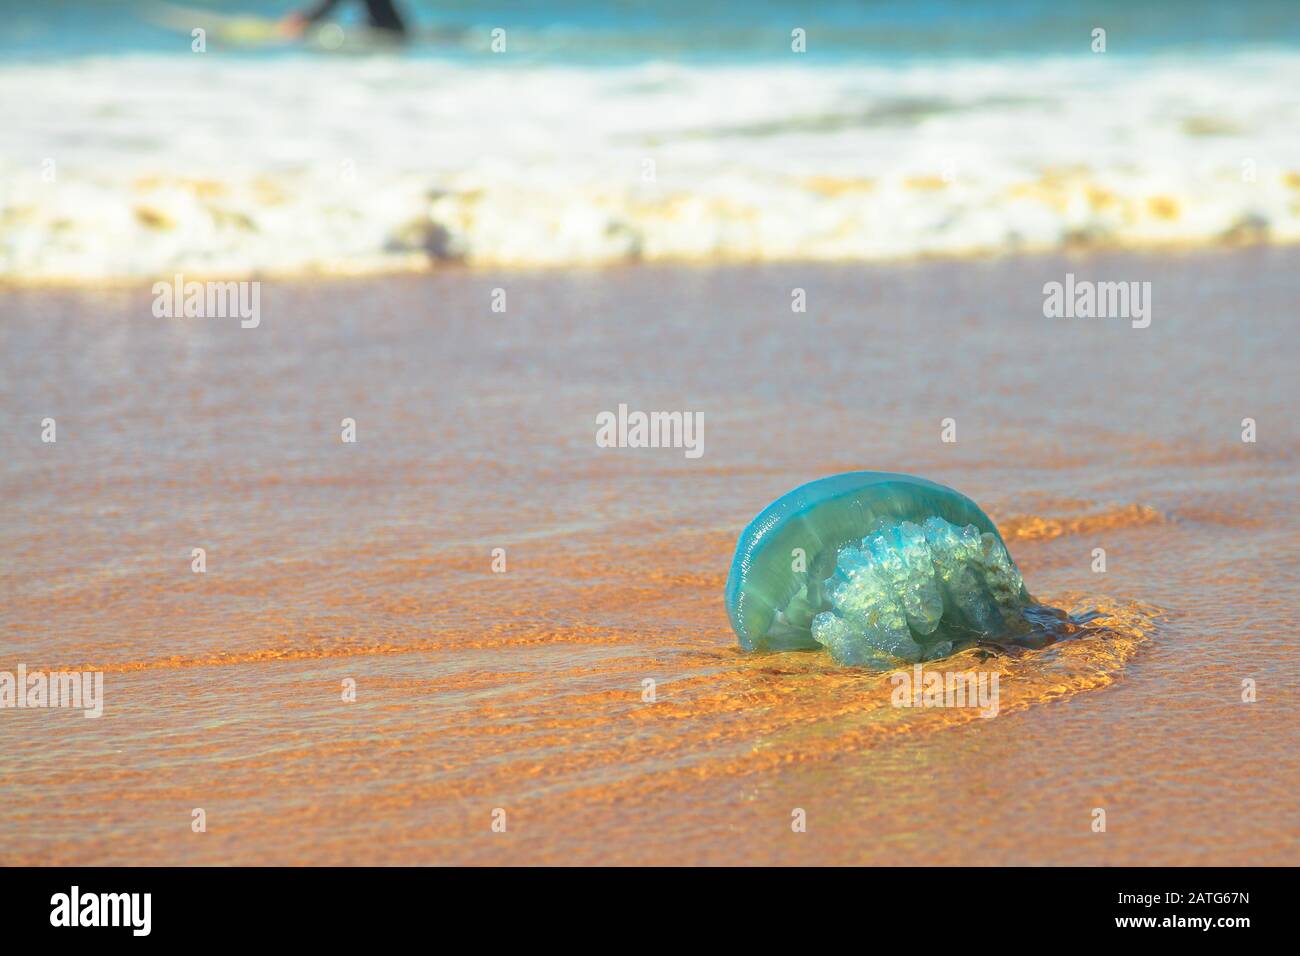 Blue jellyfish species Velella jellyfish, stranded on the sand in Gold Coast of Queensland on Australian beach. Stock Photo